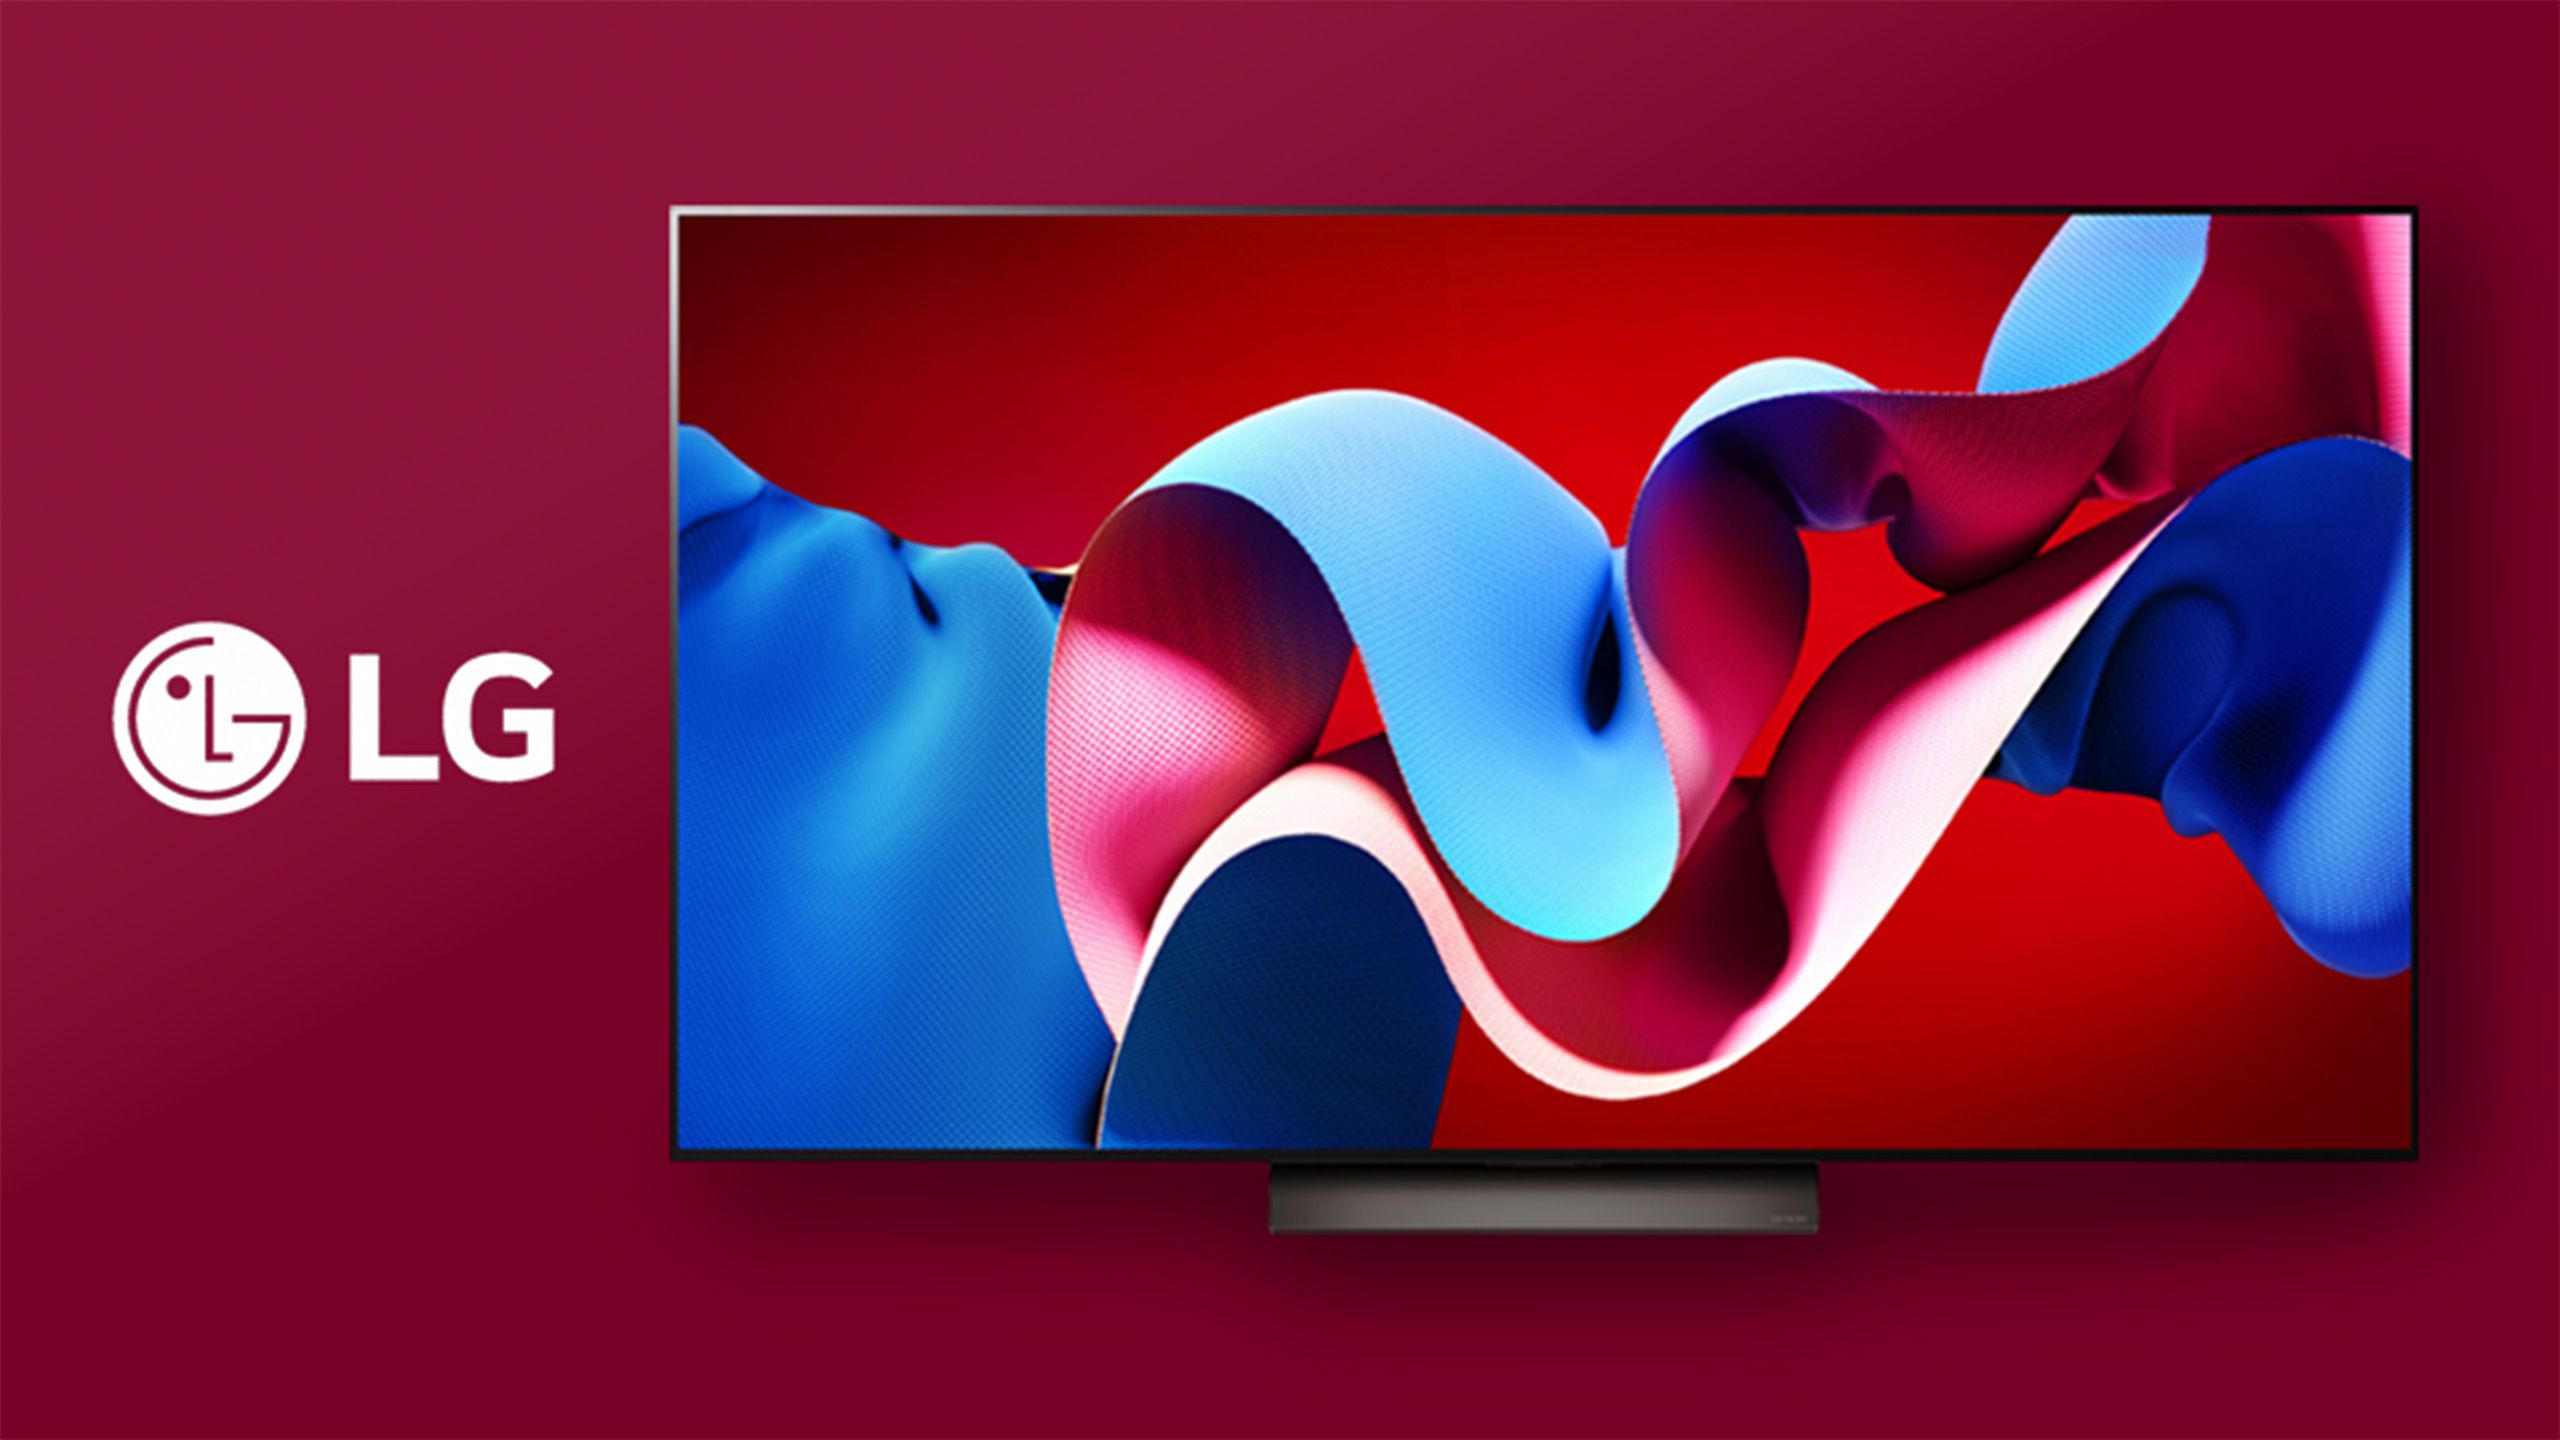 8 things to know about LG’s new G4 OLED TV